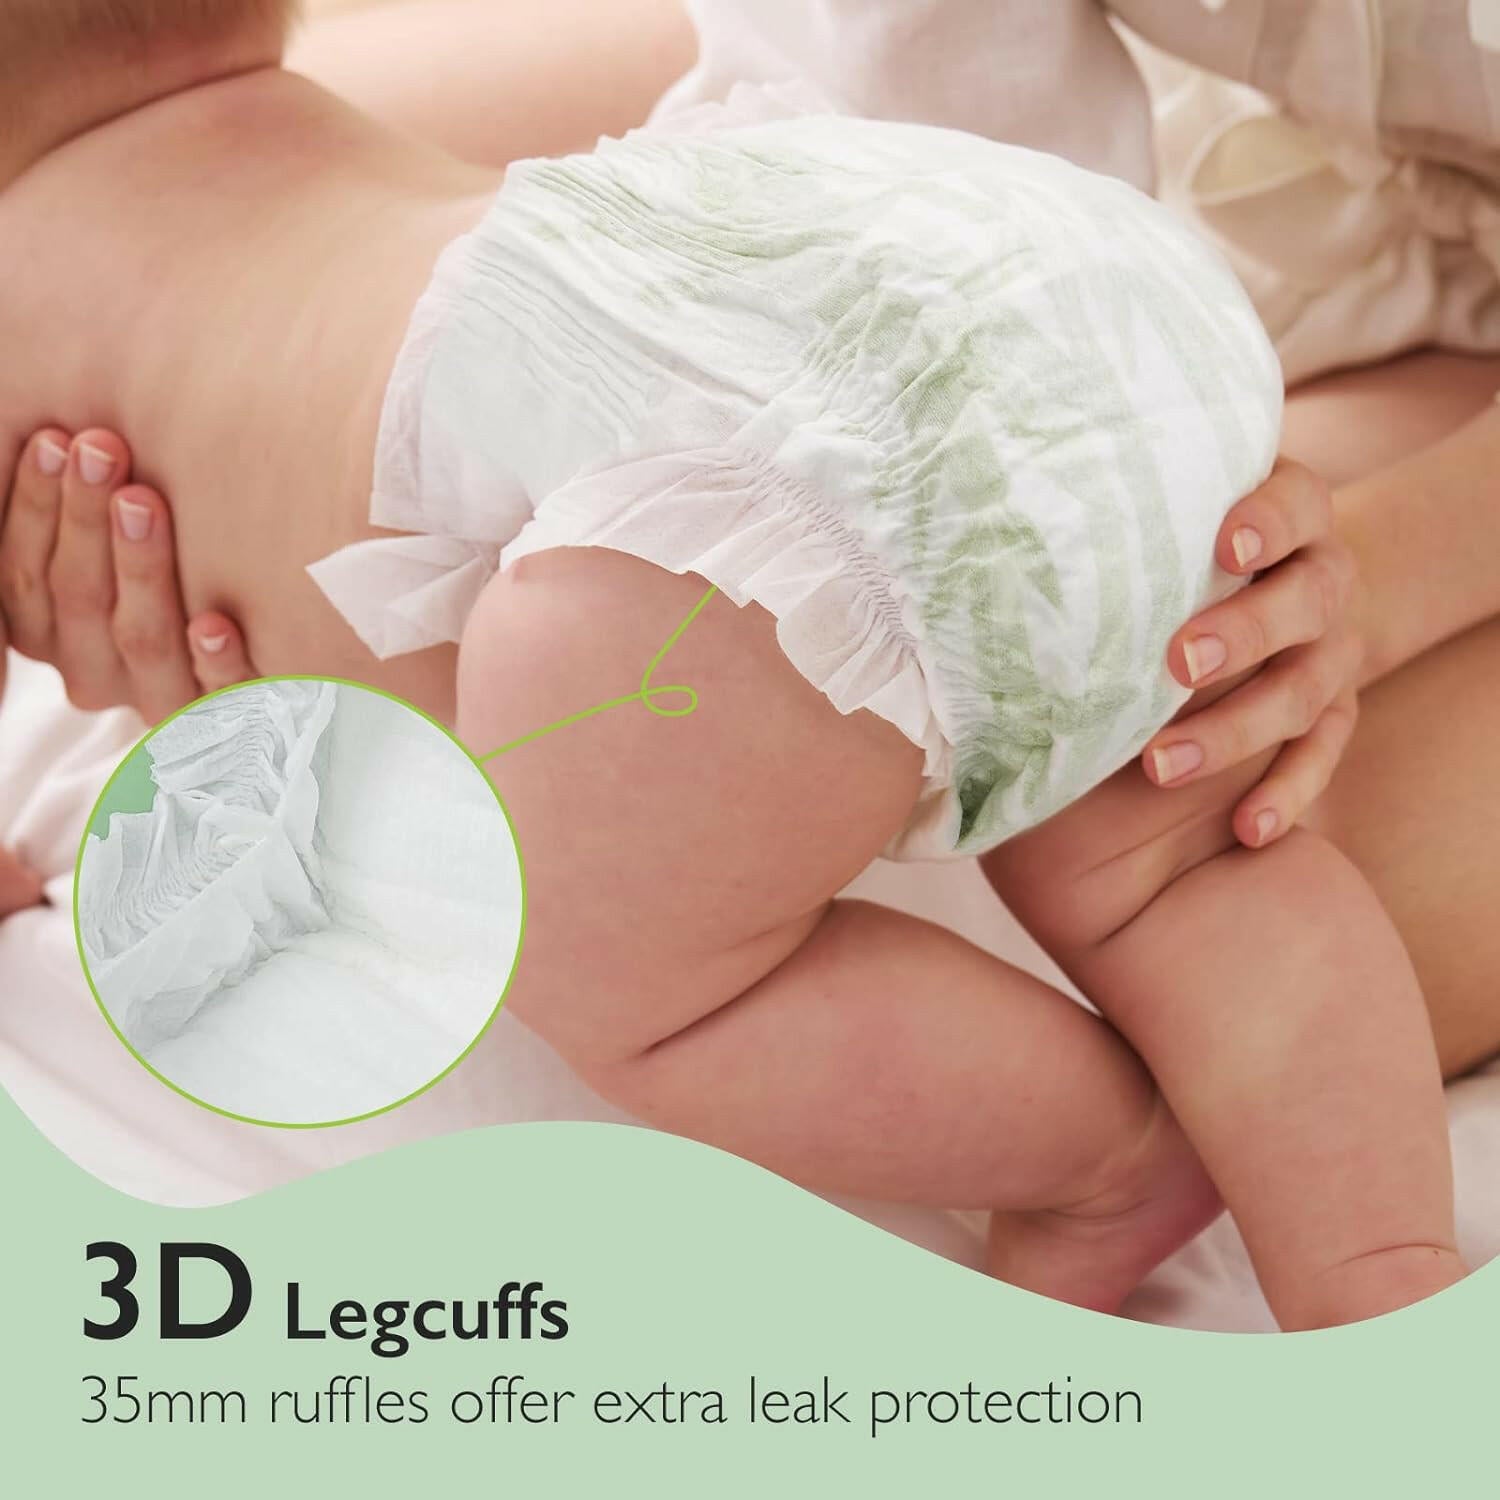 Momcozy Baby Diapers, Natural Bamboo Diapers for Sensitive Skin with Leak-Proof 3D Legcuffs